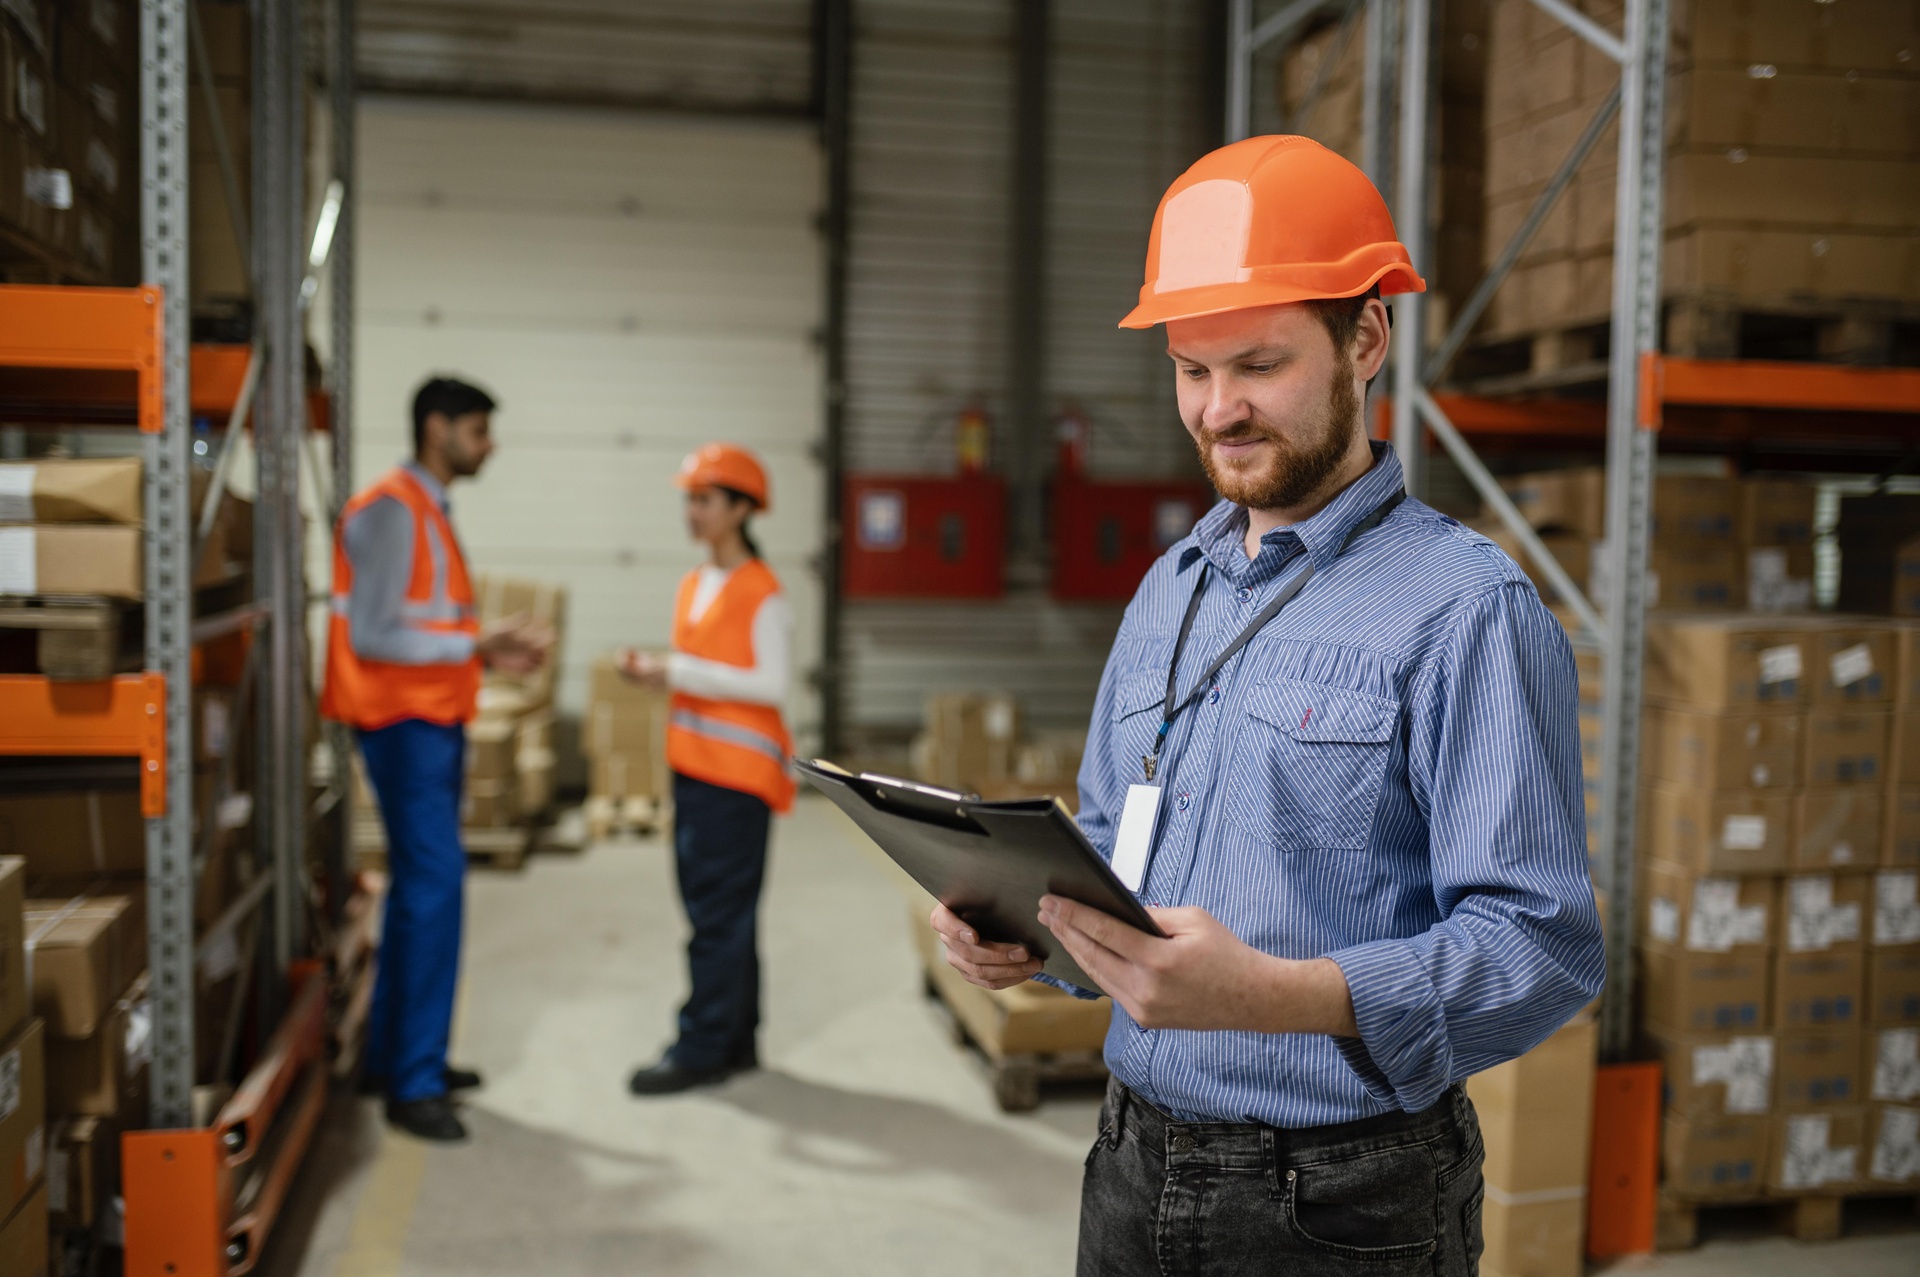 Safety and Health Inspections in the Workplace